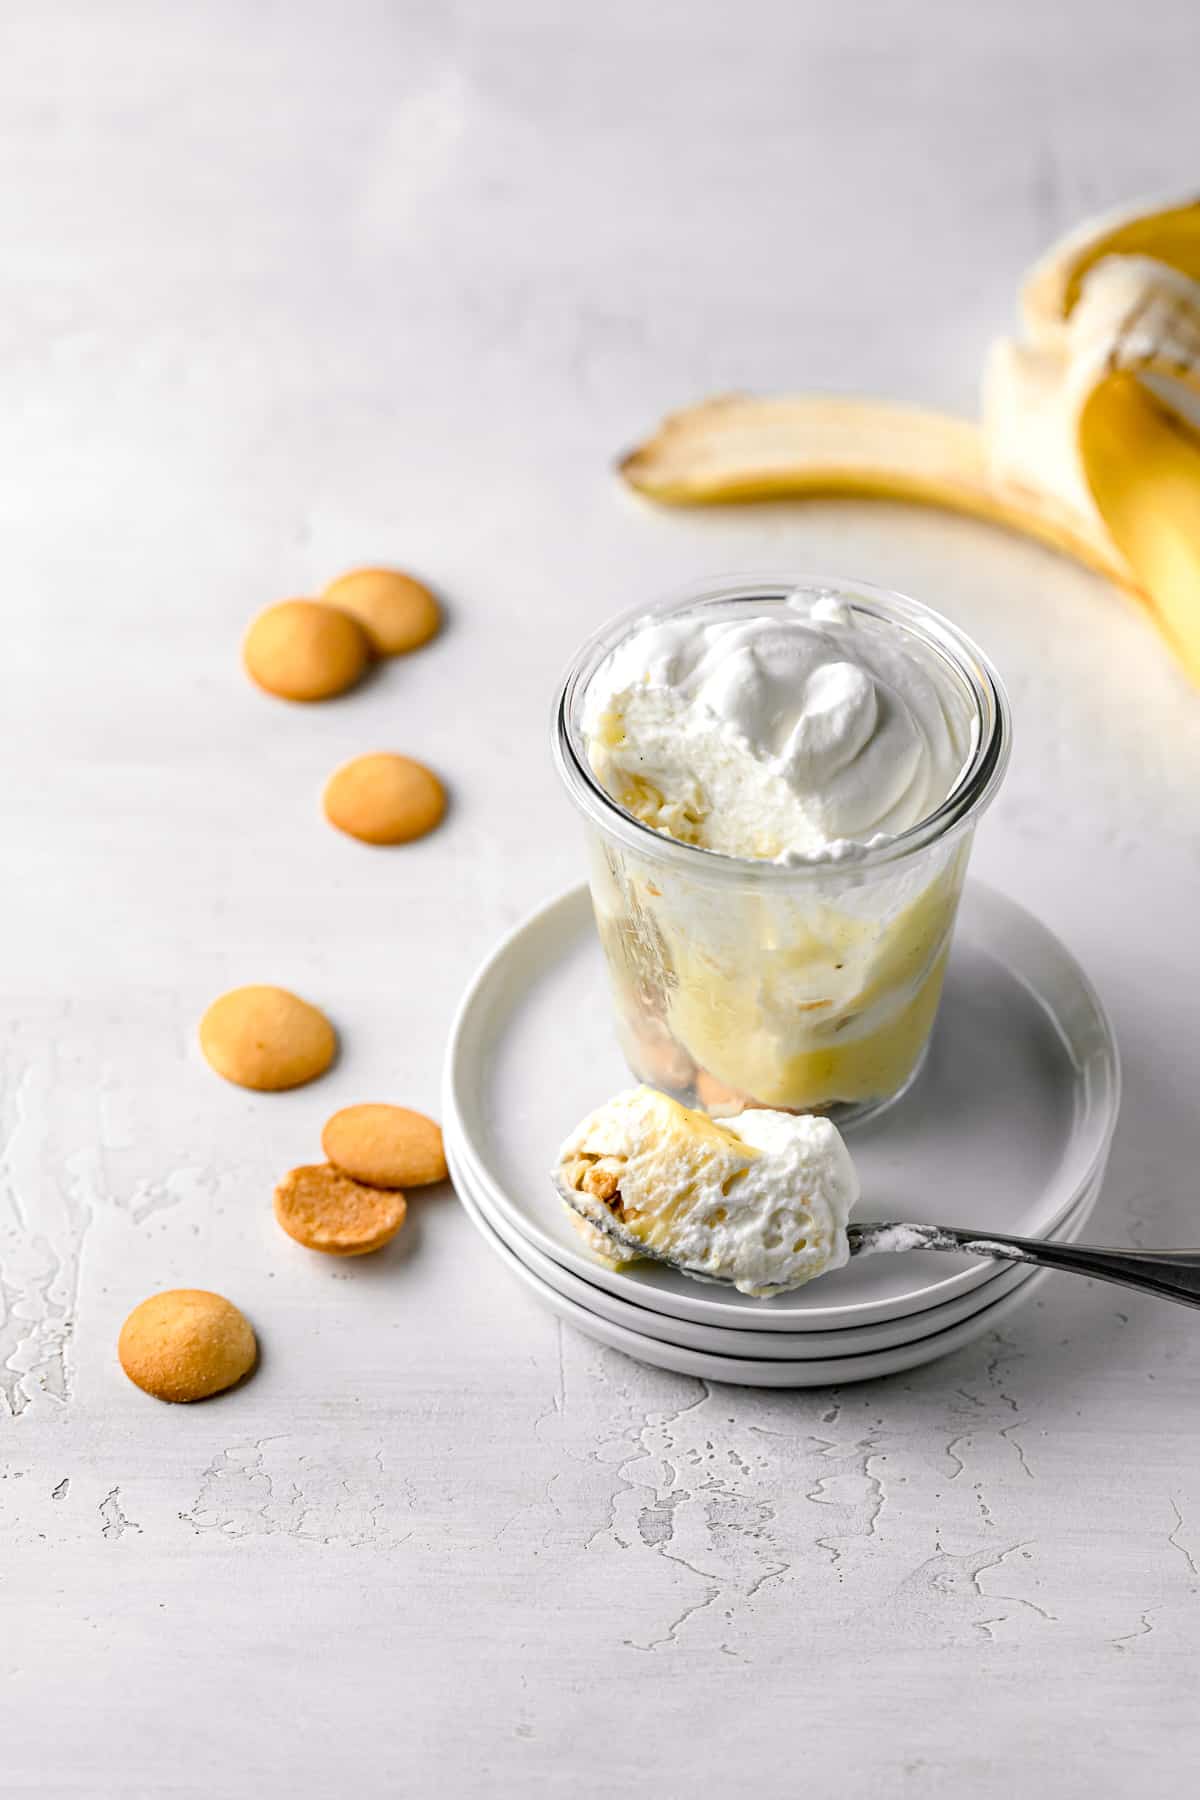 banana pudding jar on stacked plates with spoon, nilla wafers spread around, and open banana. 